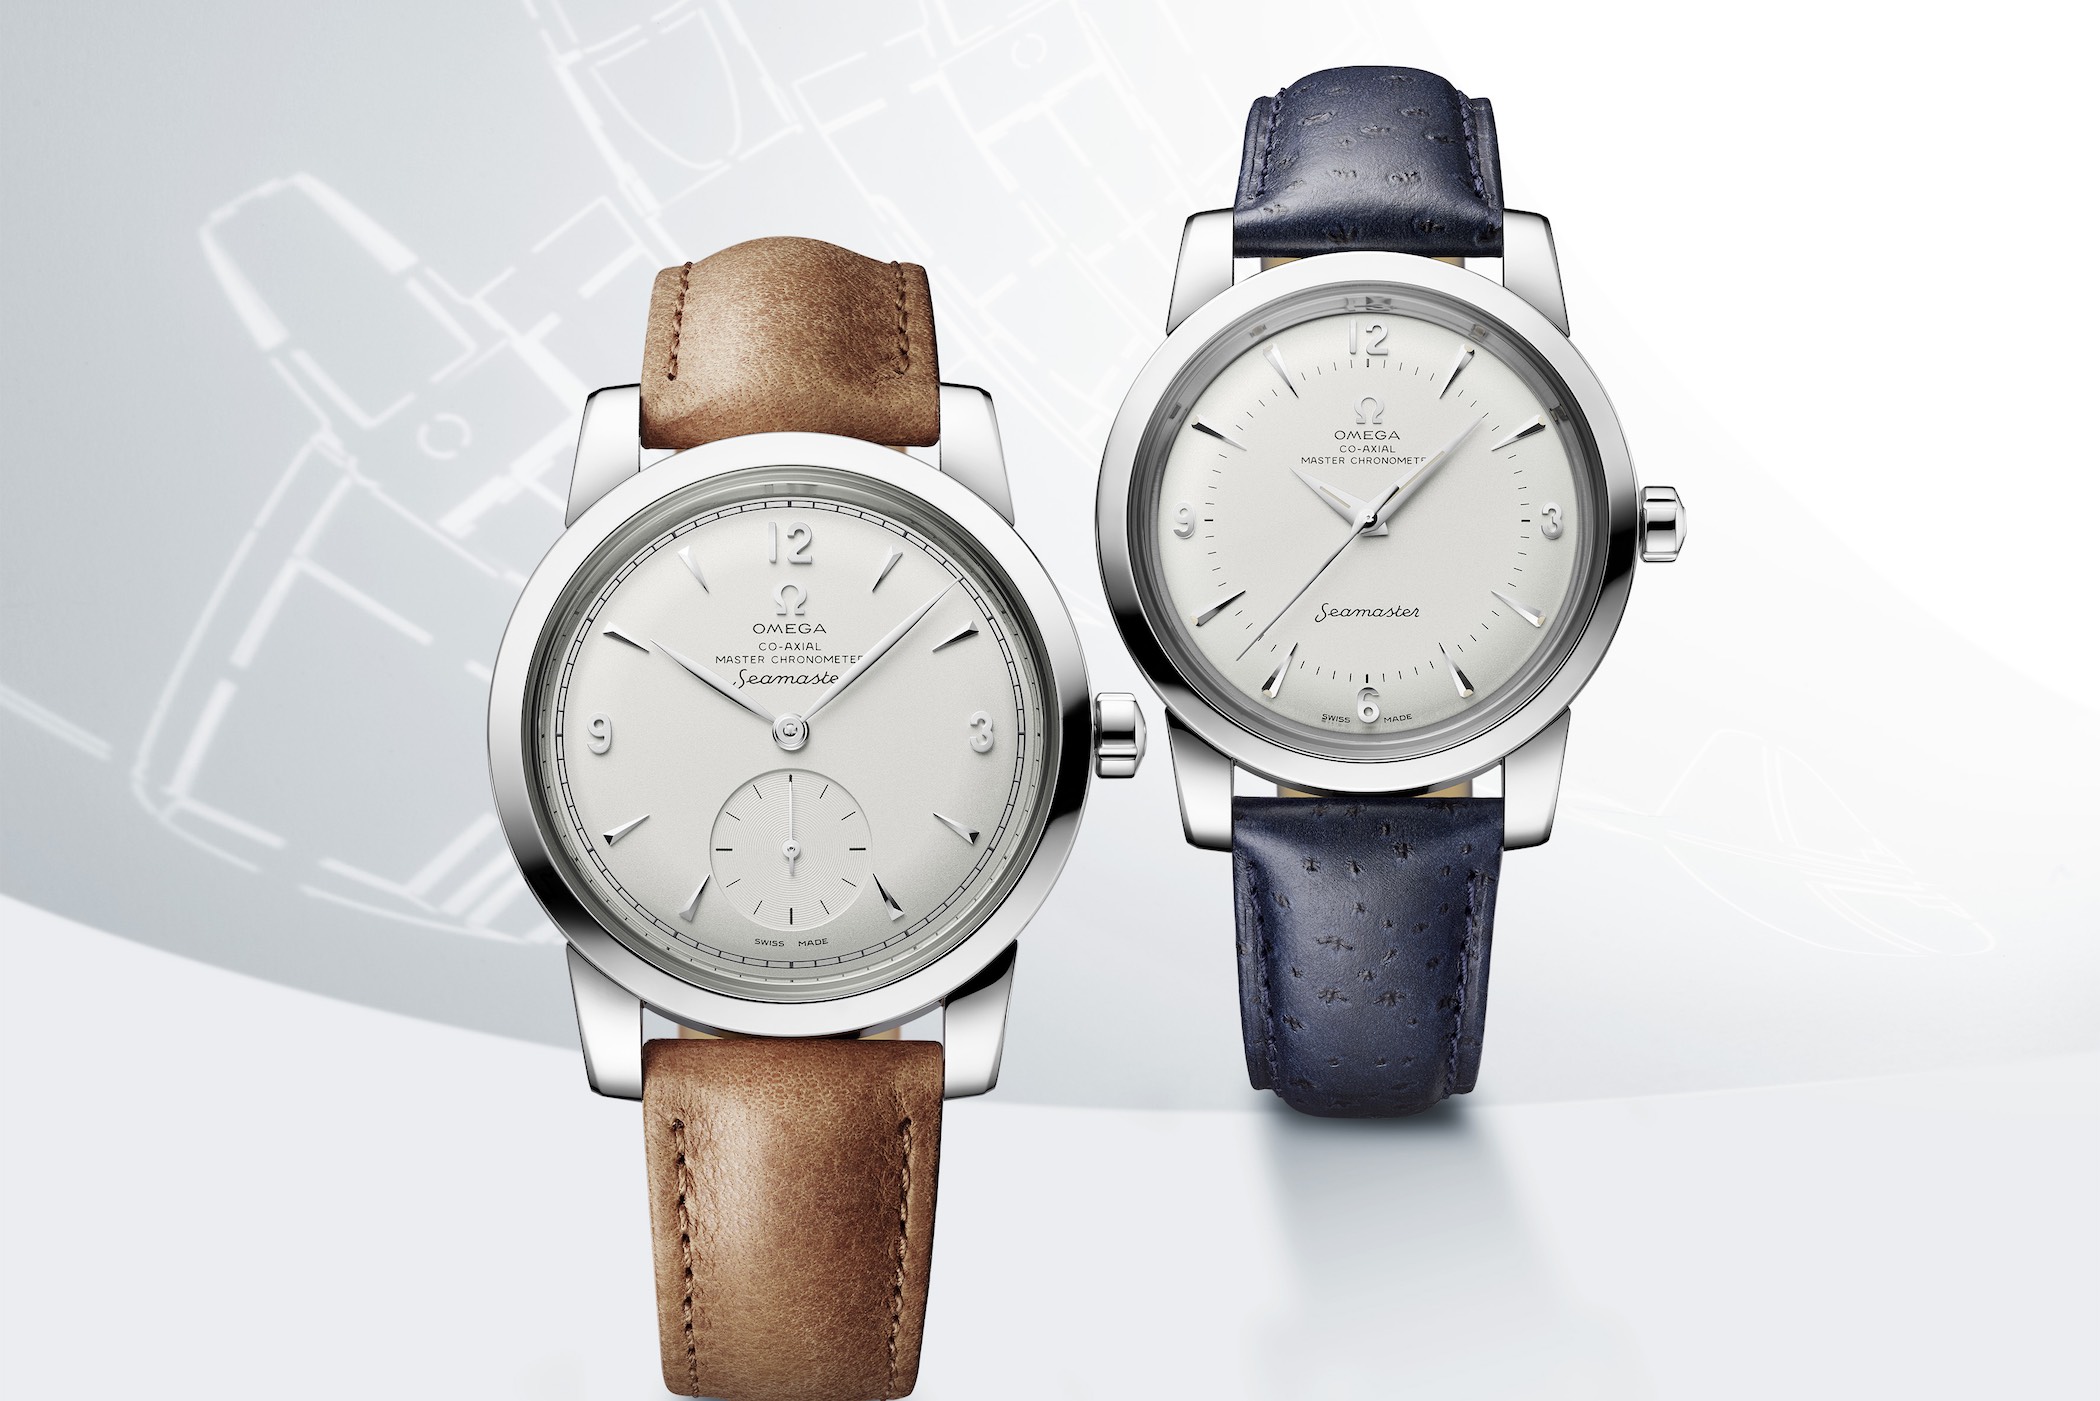 omega swiss made watches price